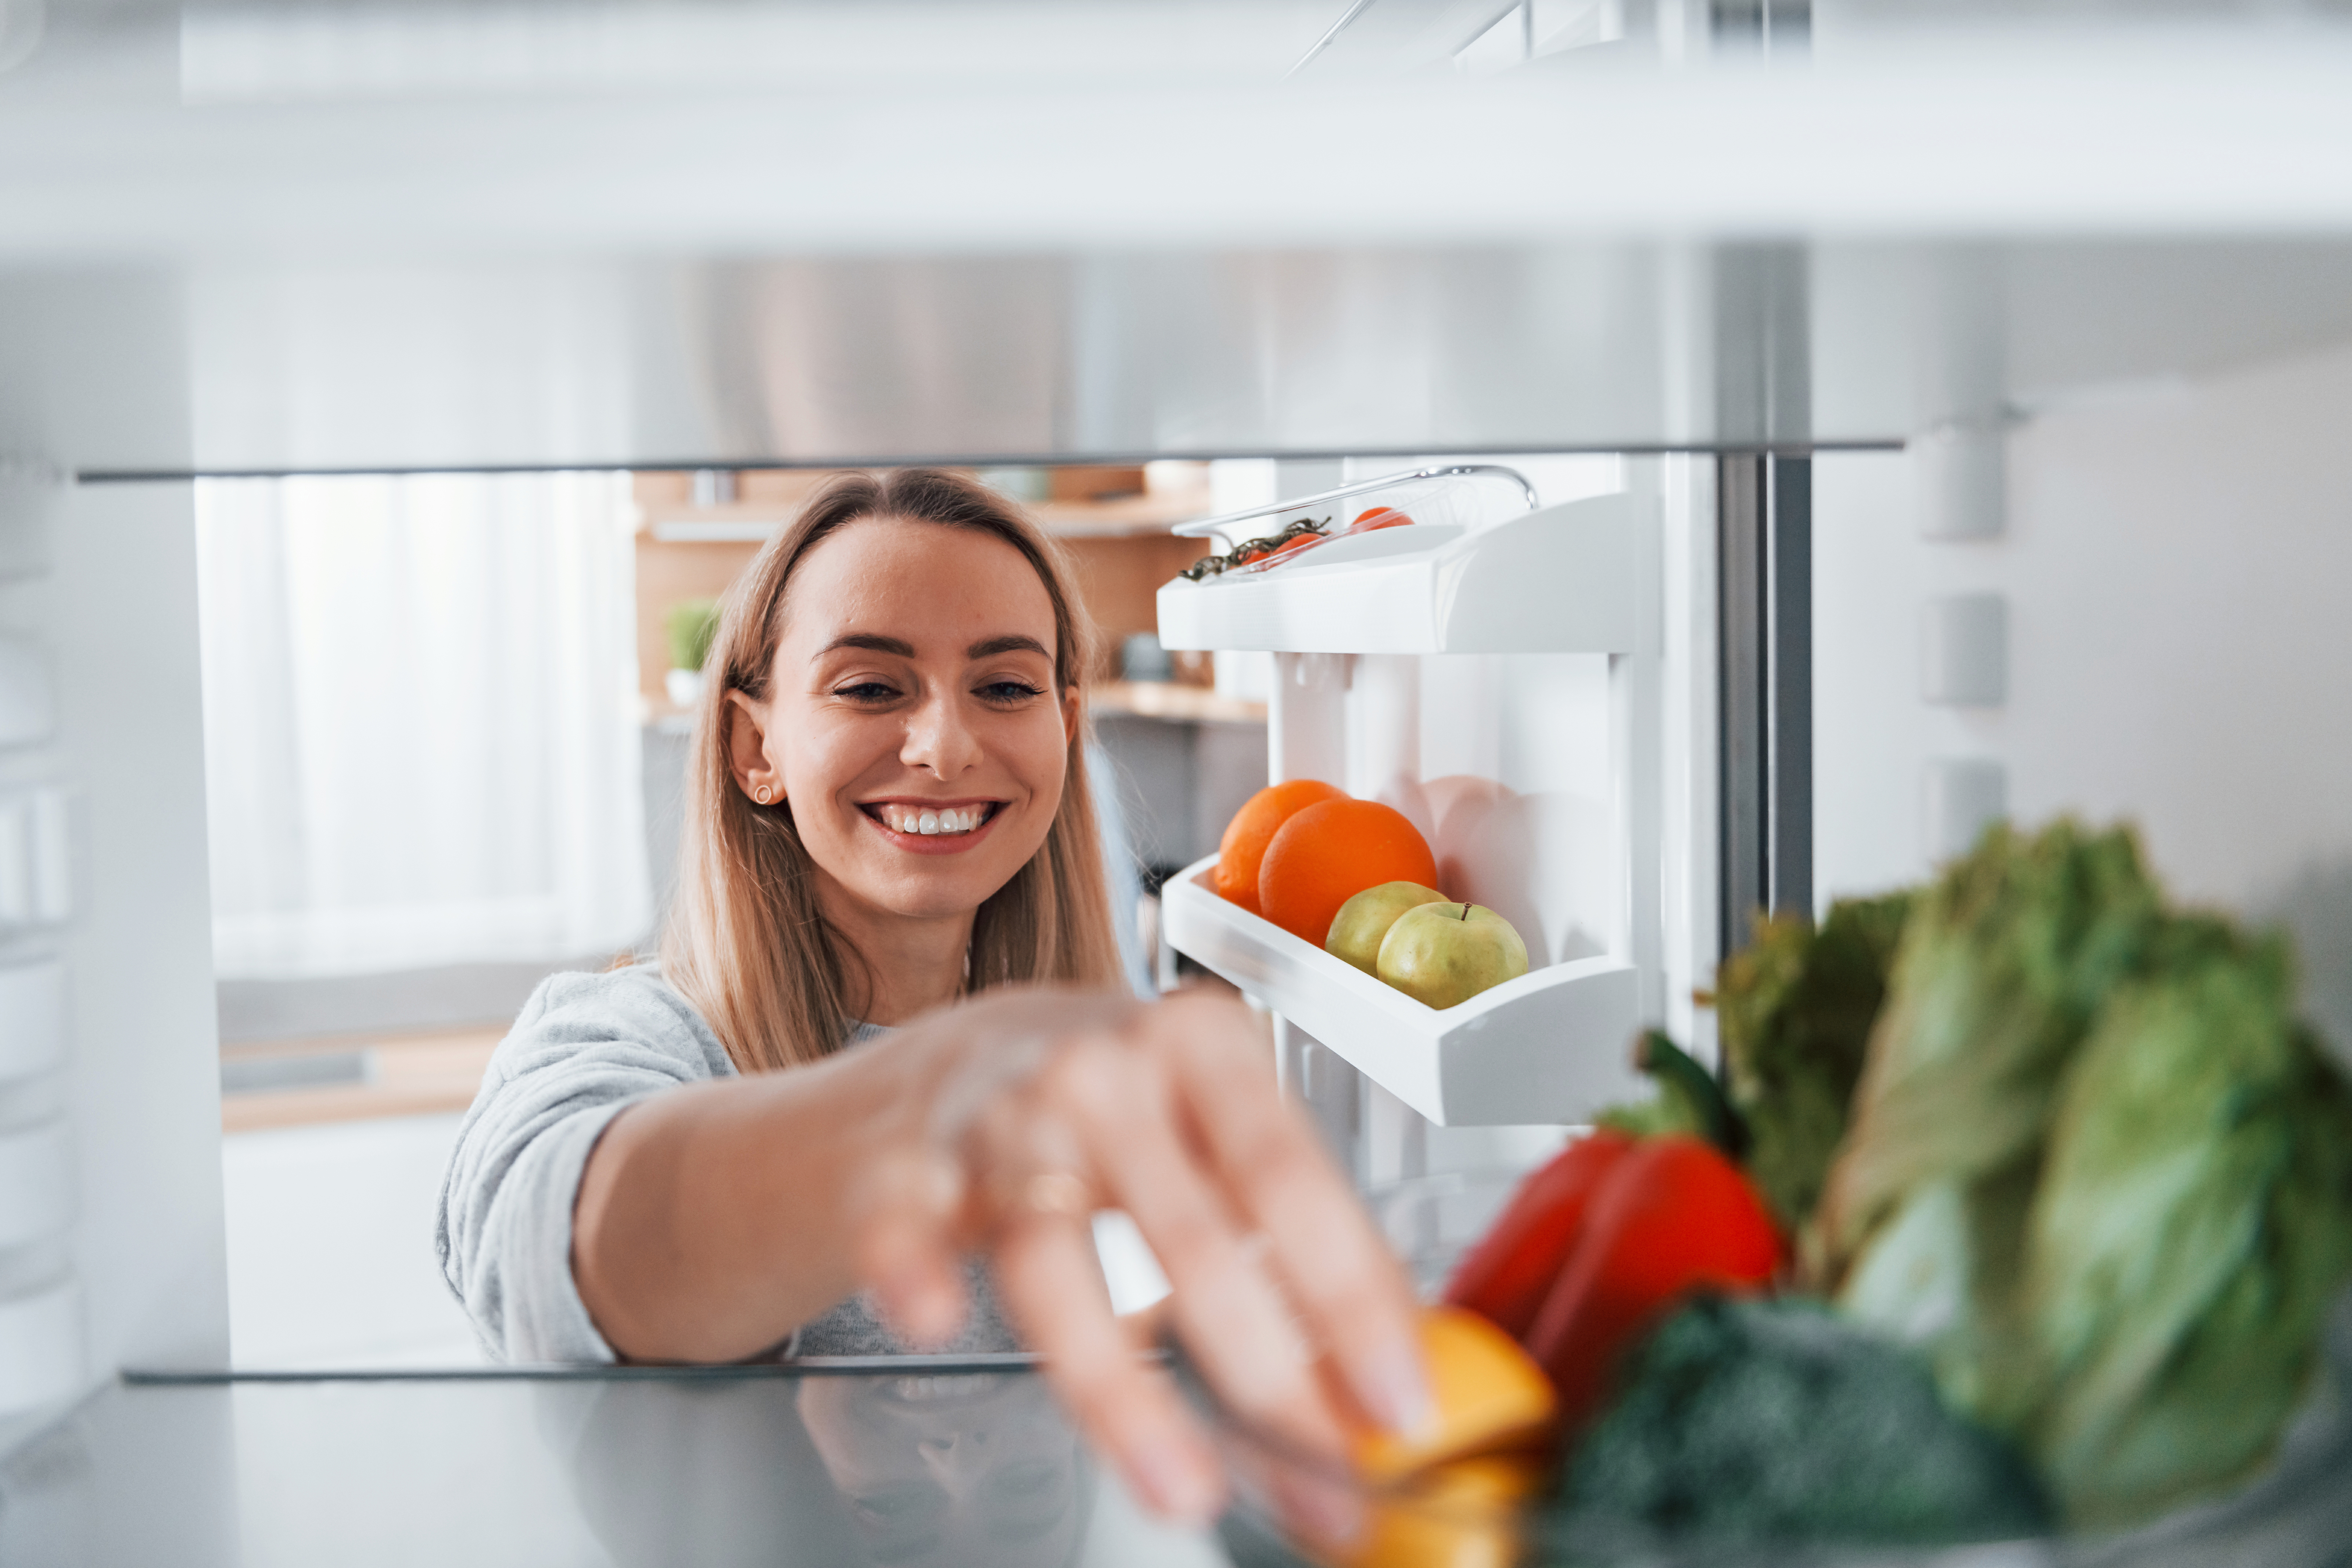 Maximize Fridge Space With These Clever Storage Hacks: Optimize Your Fridge & Save Money on Groceries